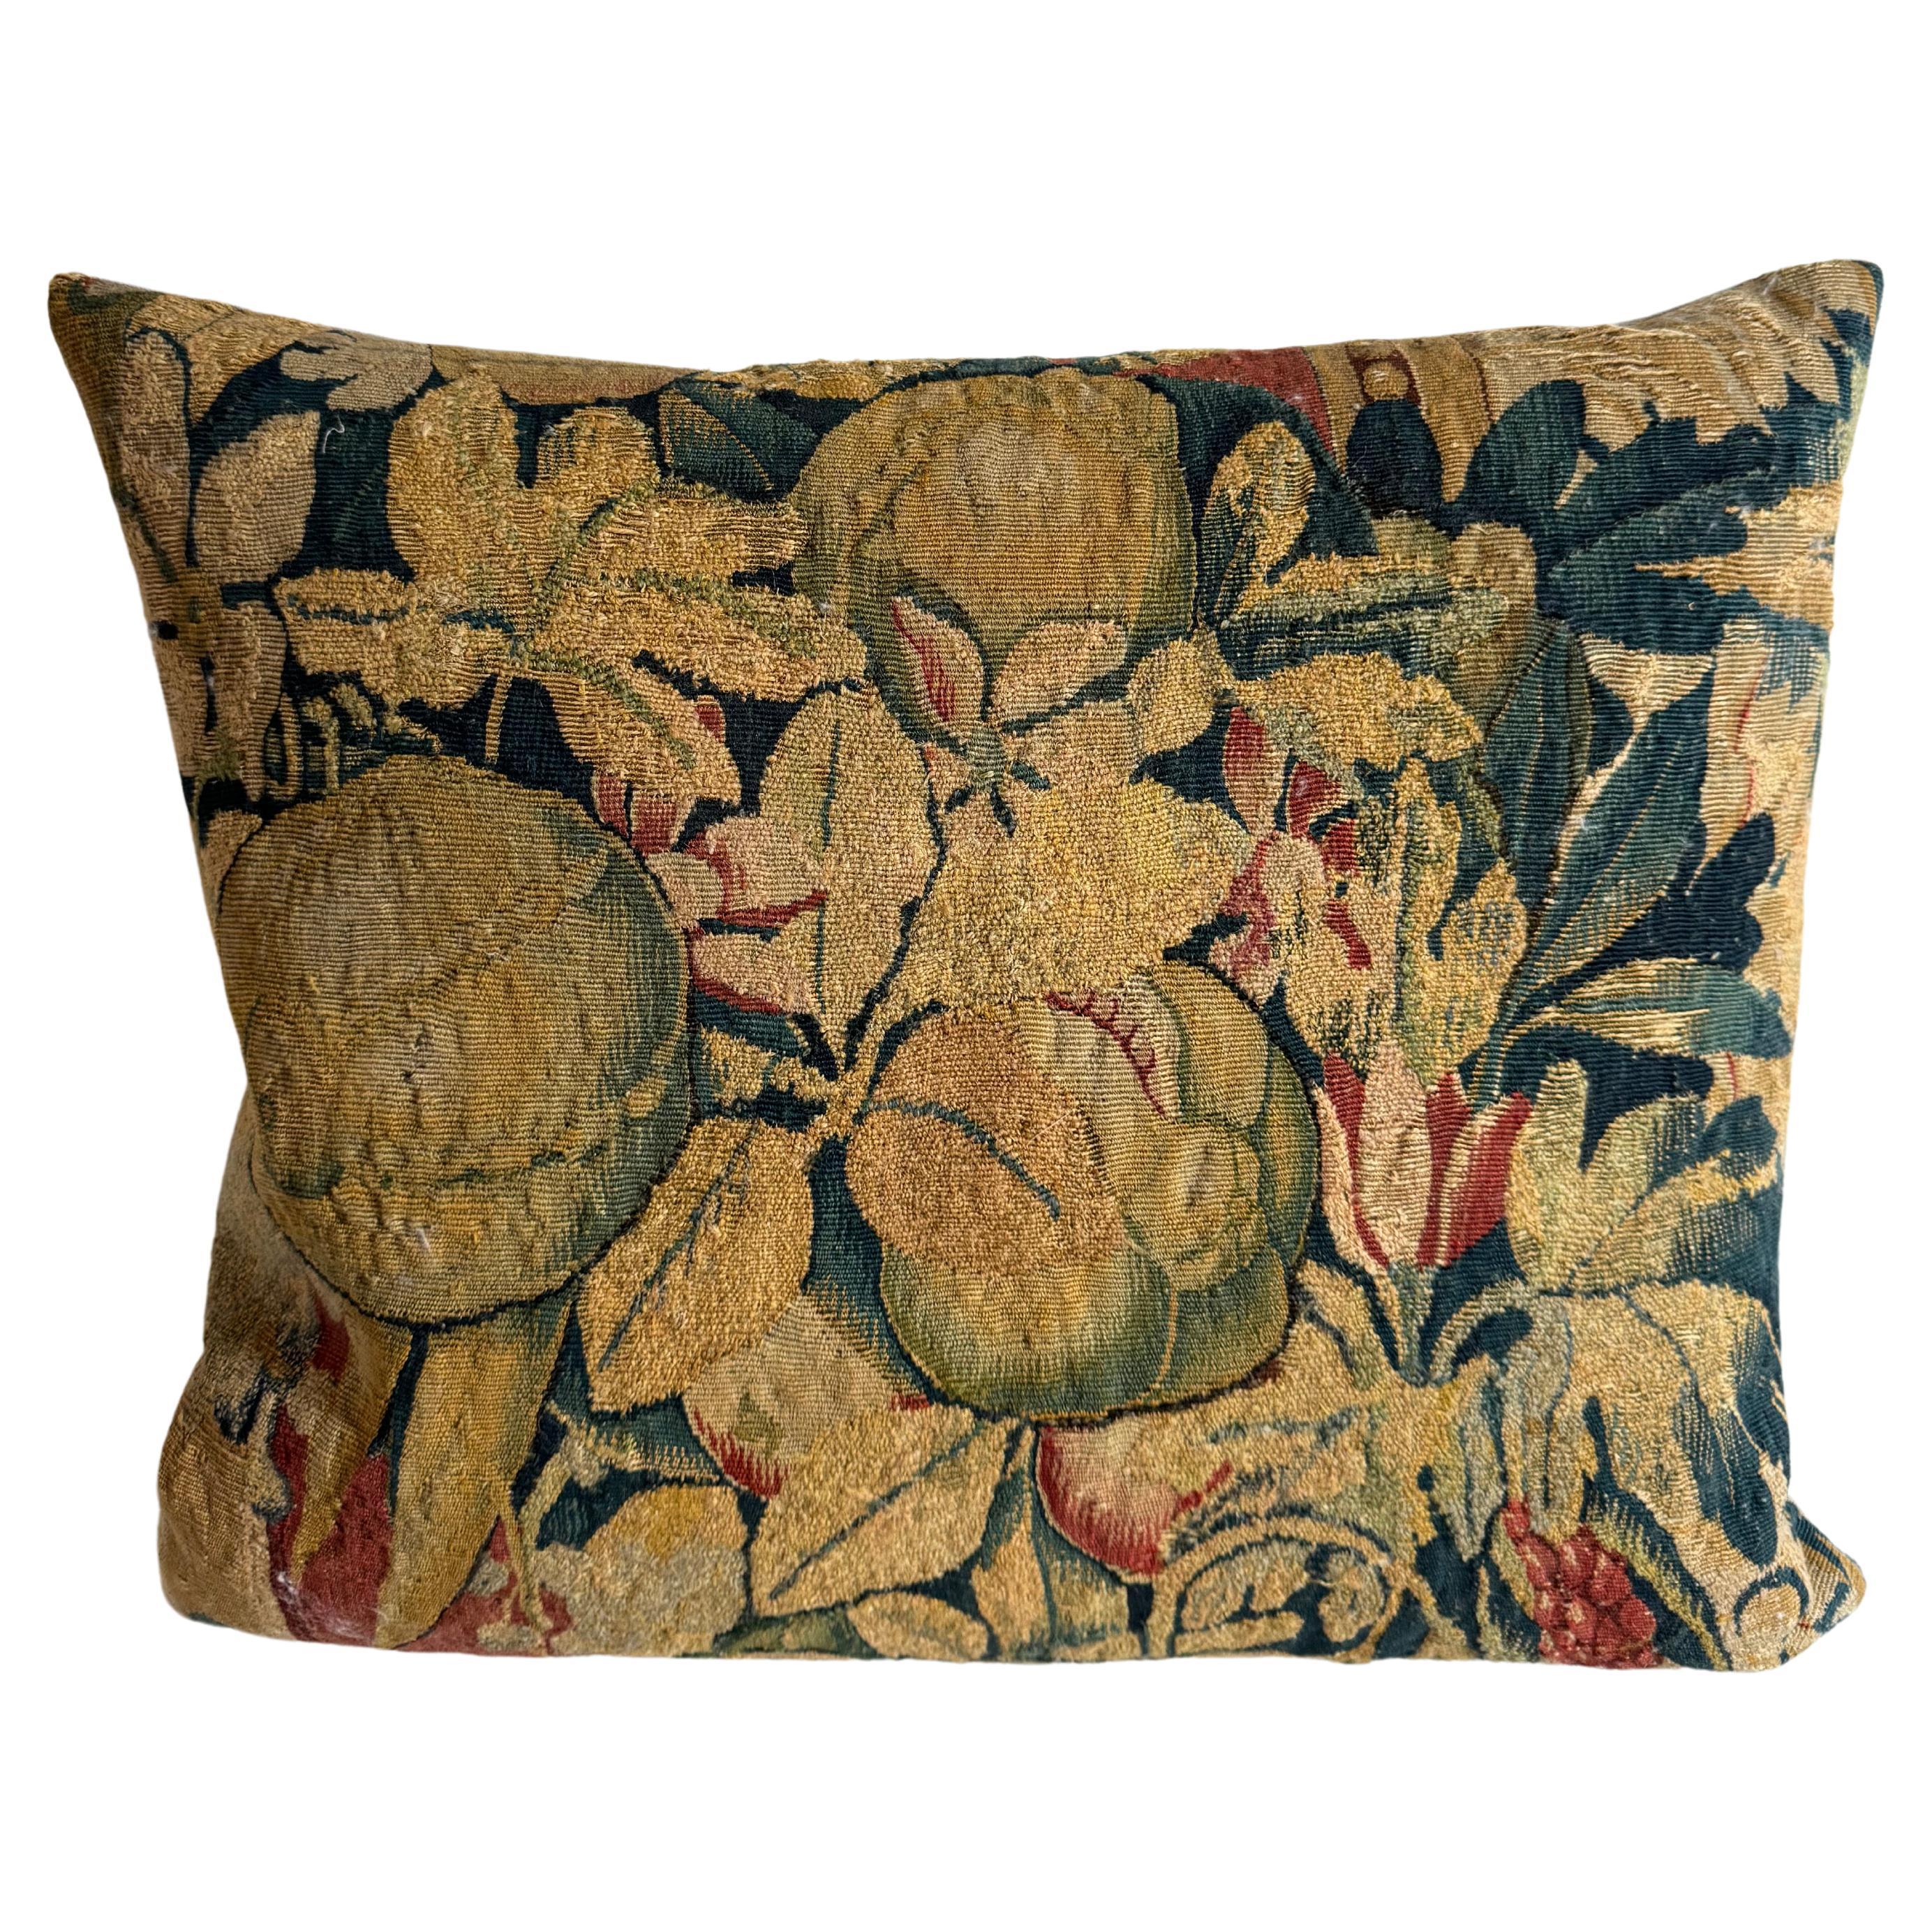 Brussels 16th Century Pillow - 21" x 18"